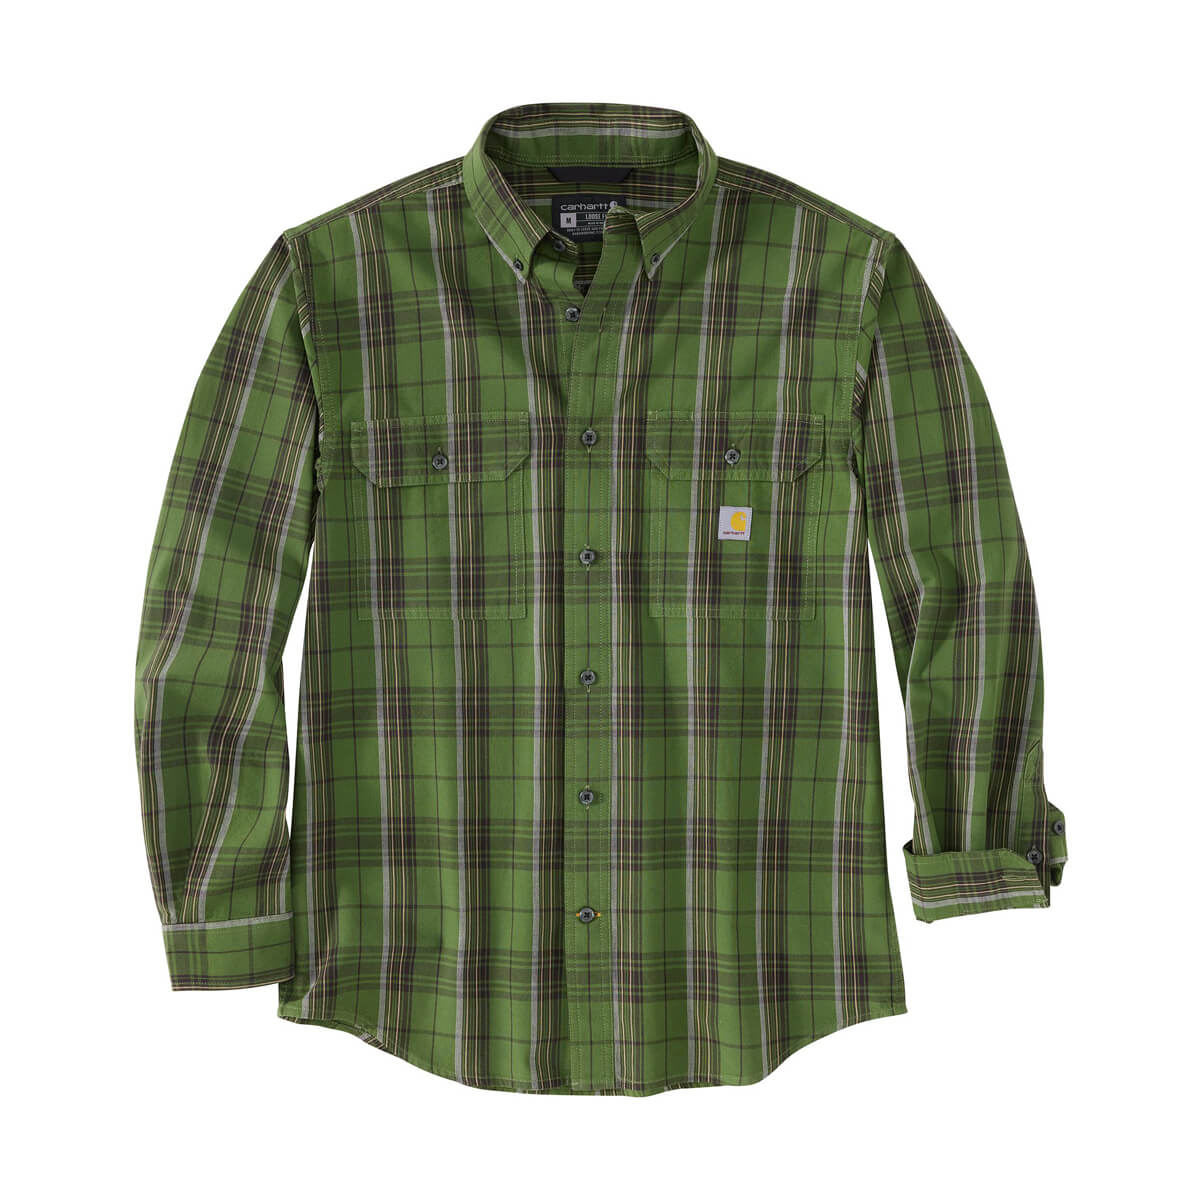 Carhartt Loose Fit Midweight Chambray Long-Sleeve Plaid Shirt - Chive